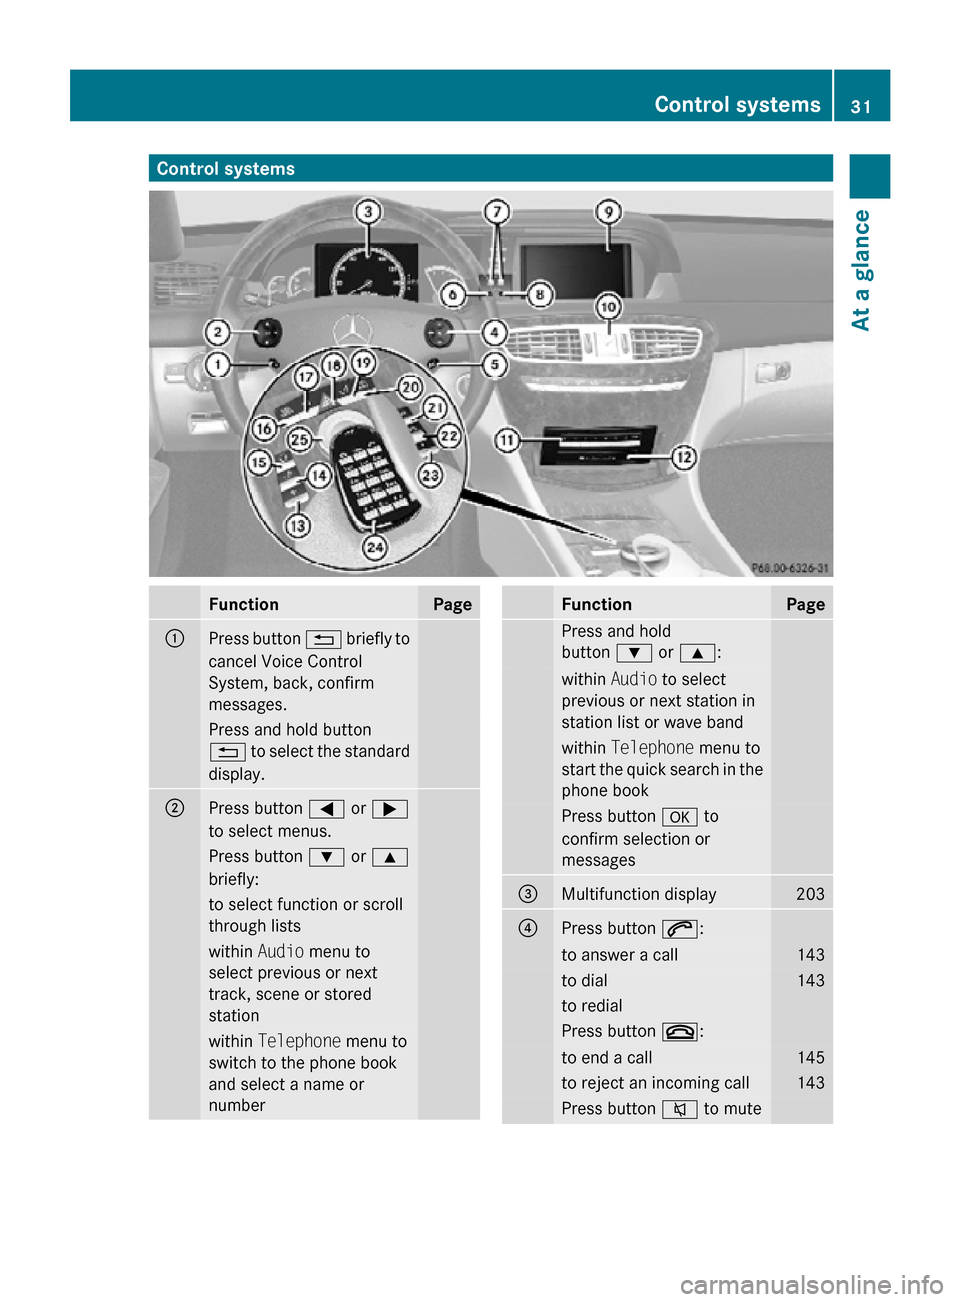 MERCEDES-BENZ CL550 2010 W216 Owners Guide Control systems
Function Page
:
Press button 
% briefly to
cancel Voice Control
System, back, confirm
messages. Press and hold button
% to select the standard
display.
;
Press button = or ;
to select 